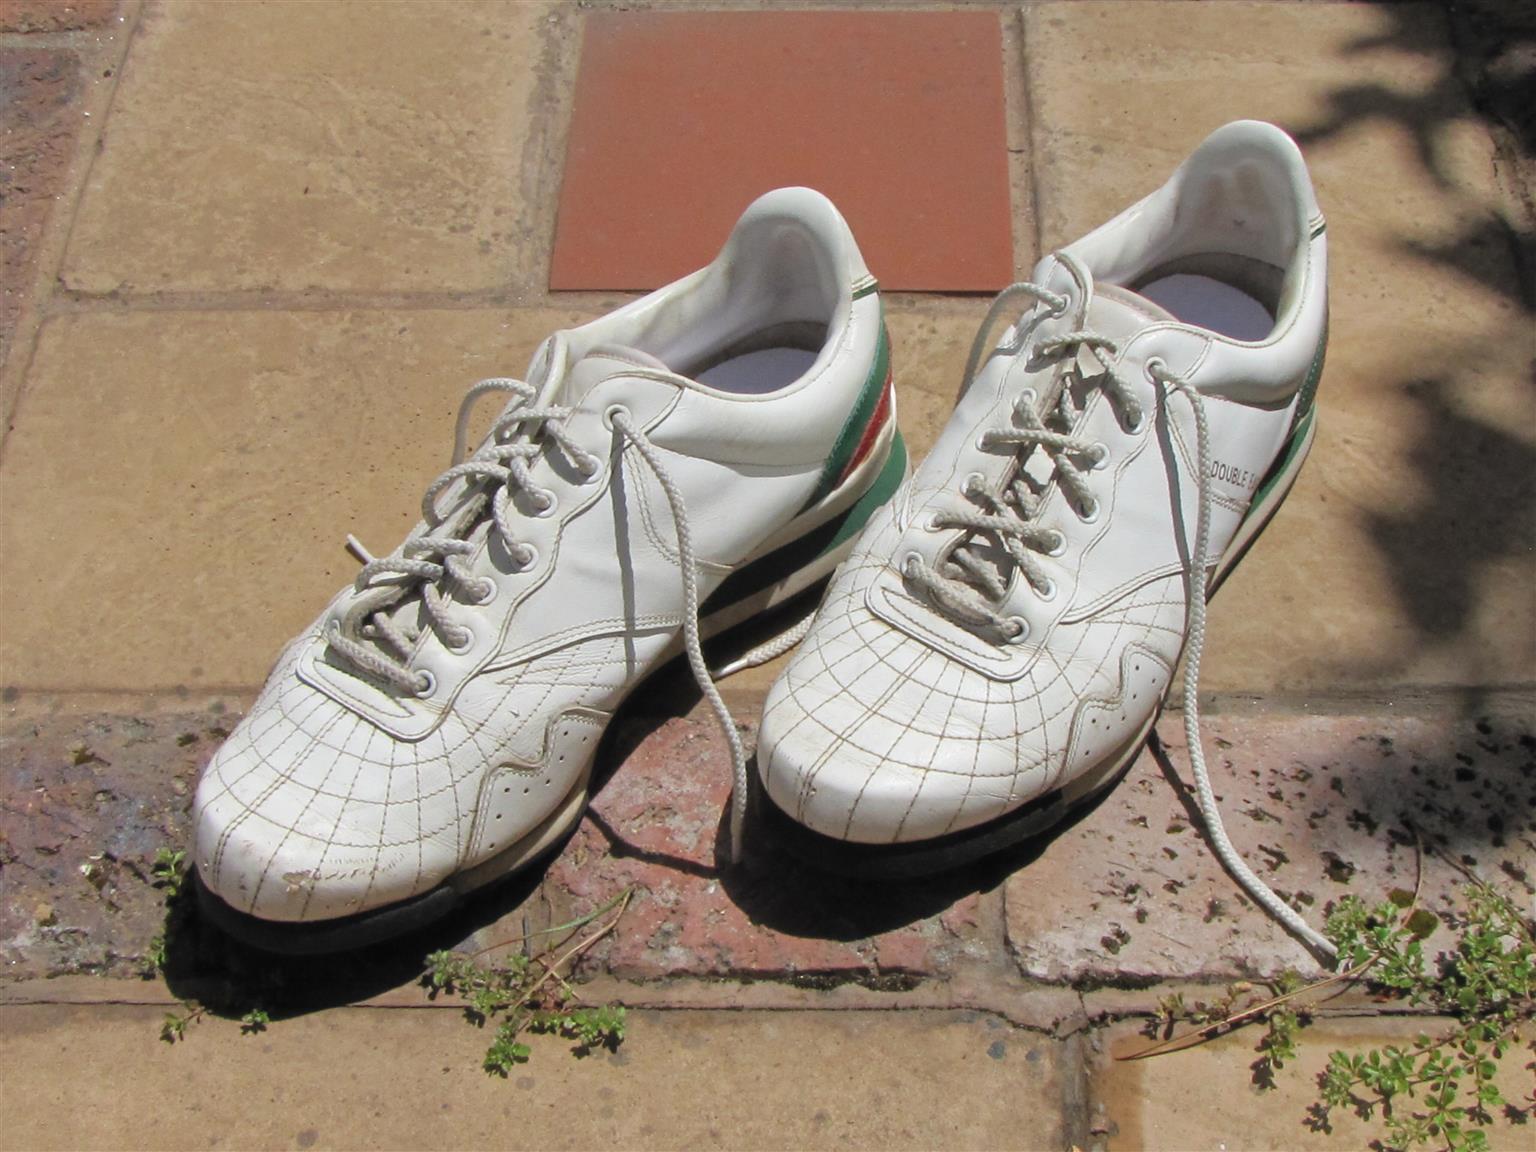 GOLF SHOES - | Junk Mail